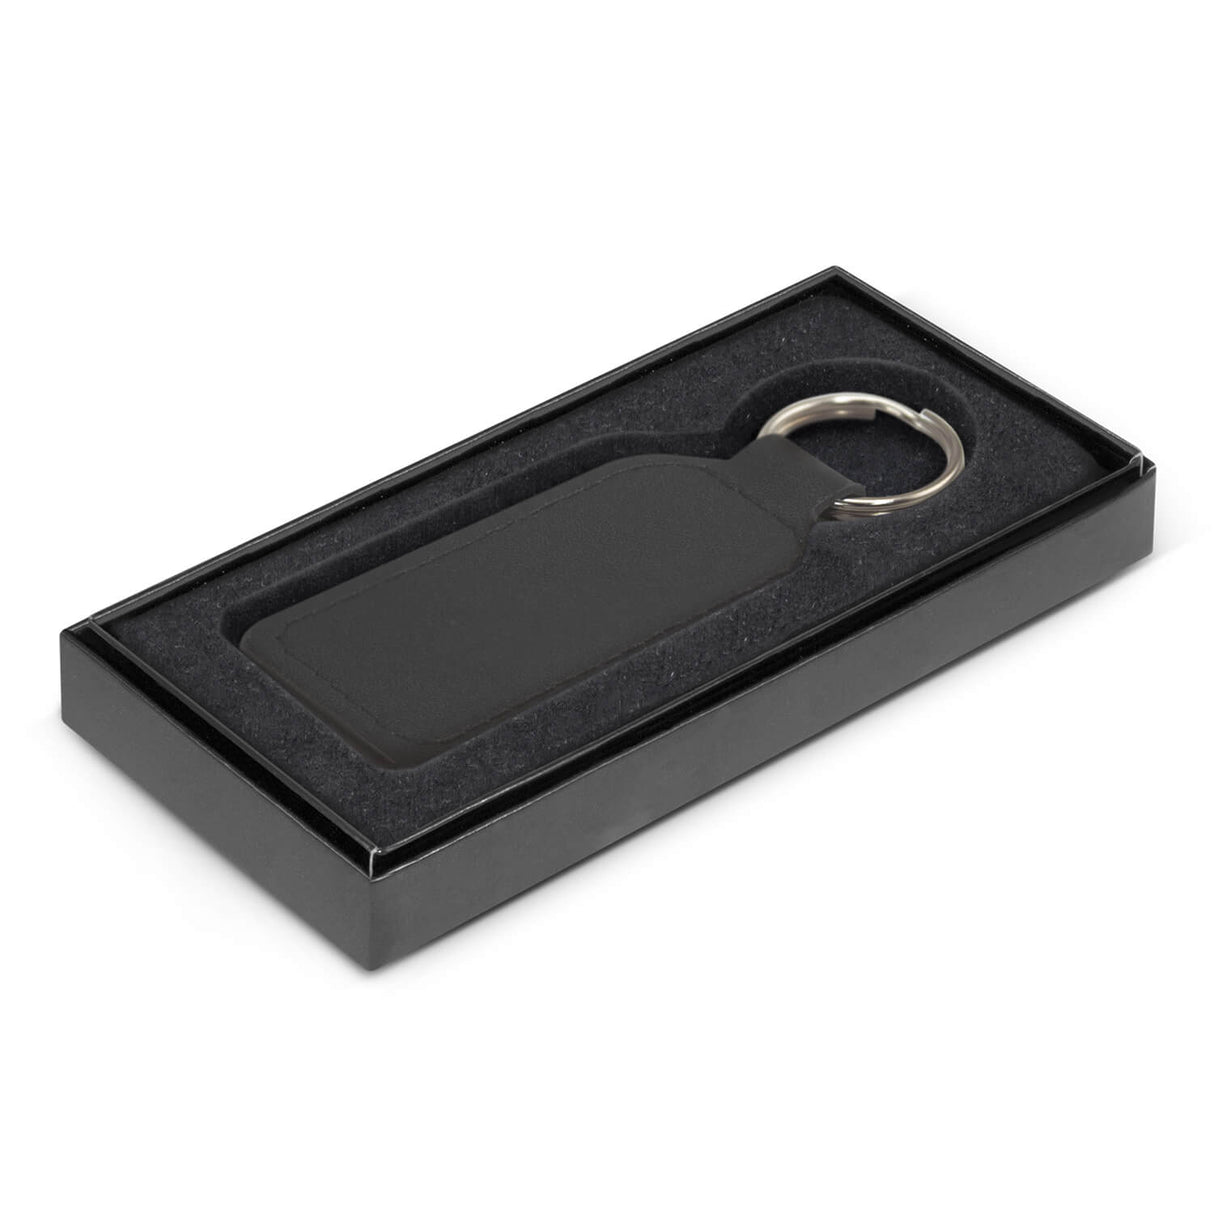 Leather Key Ring - Printed